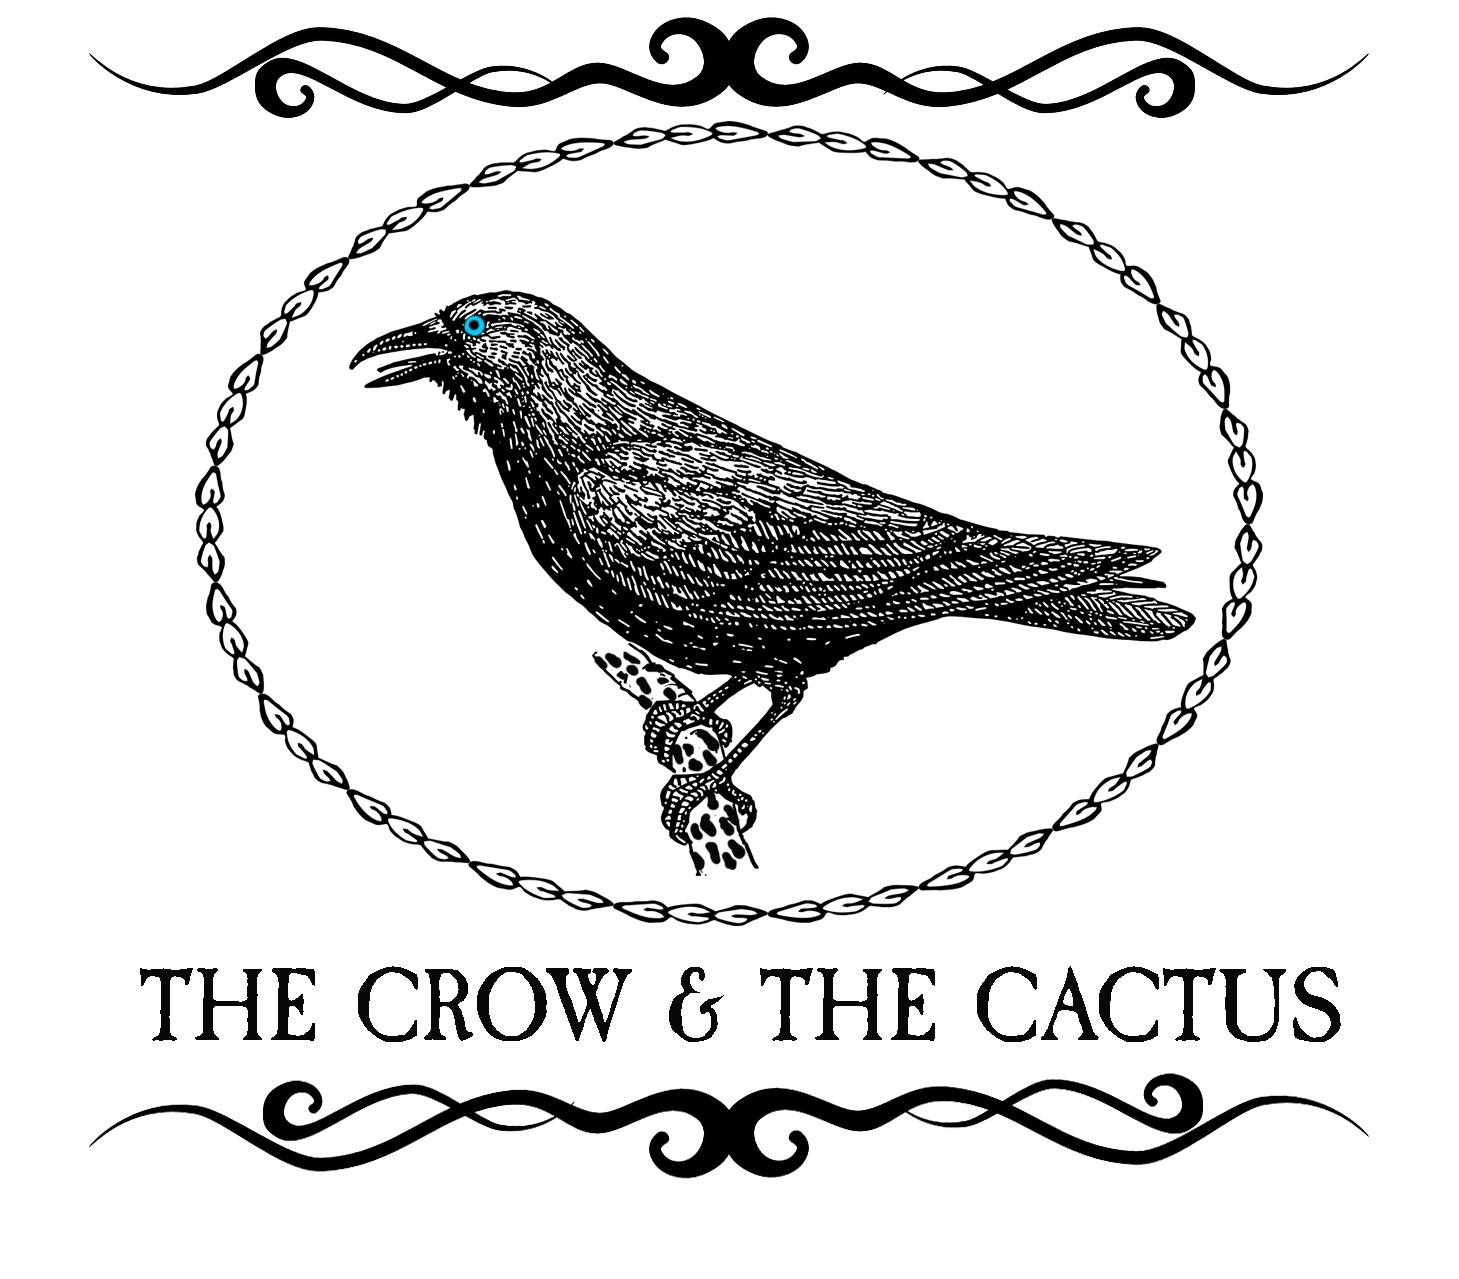 The Crow and The Cactus